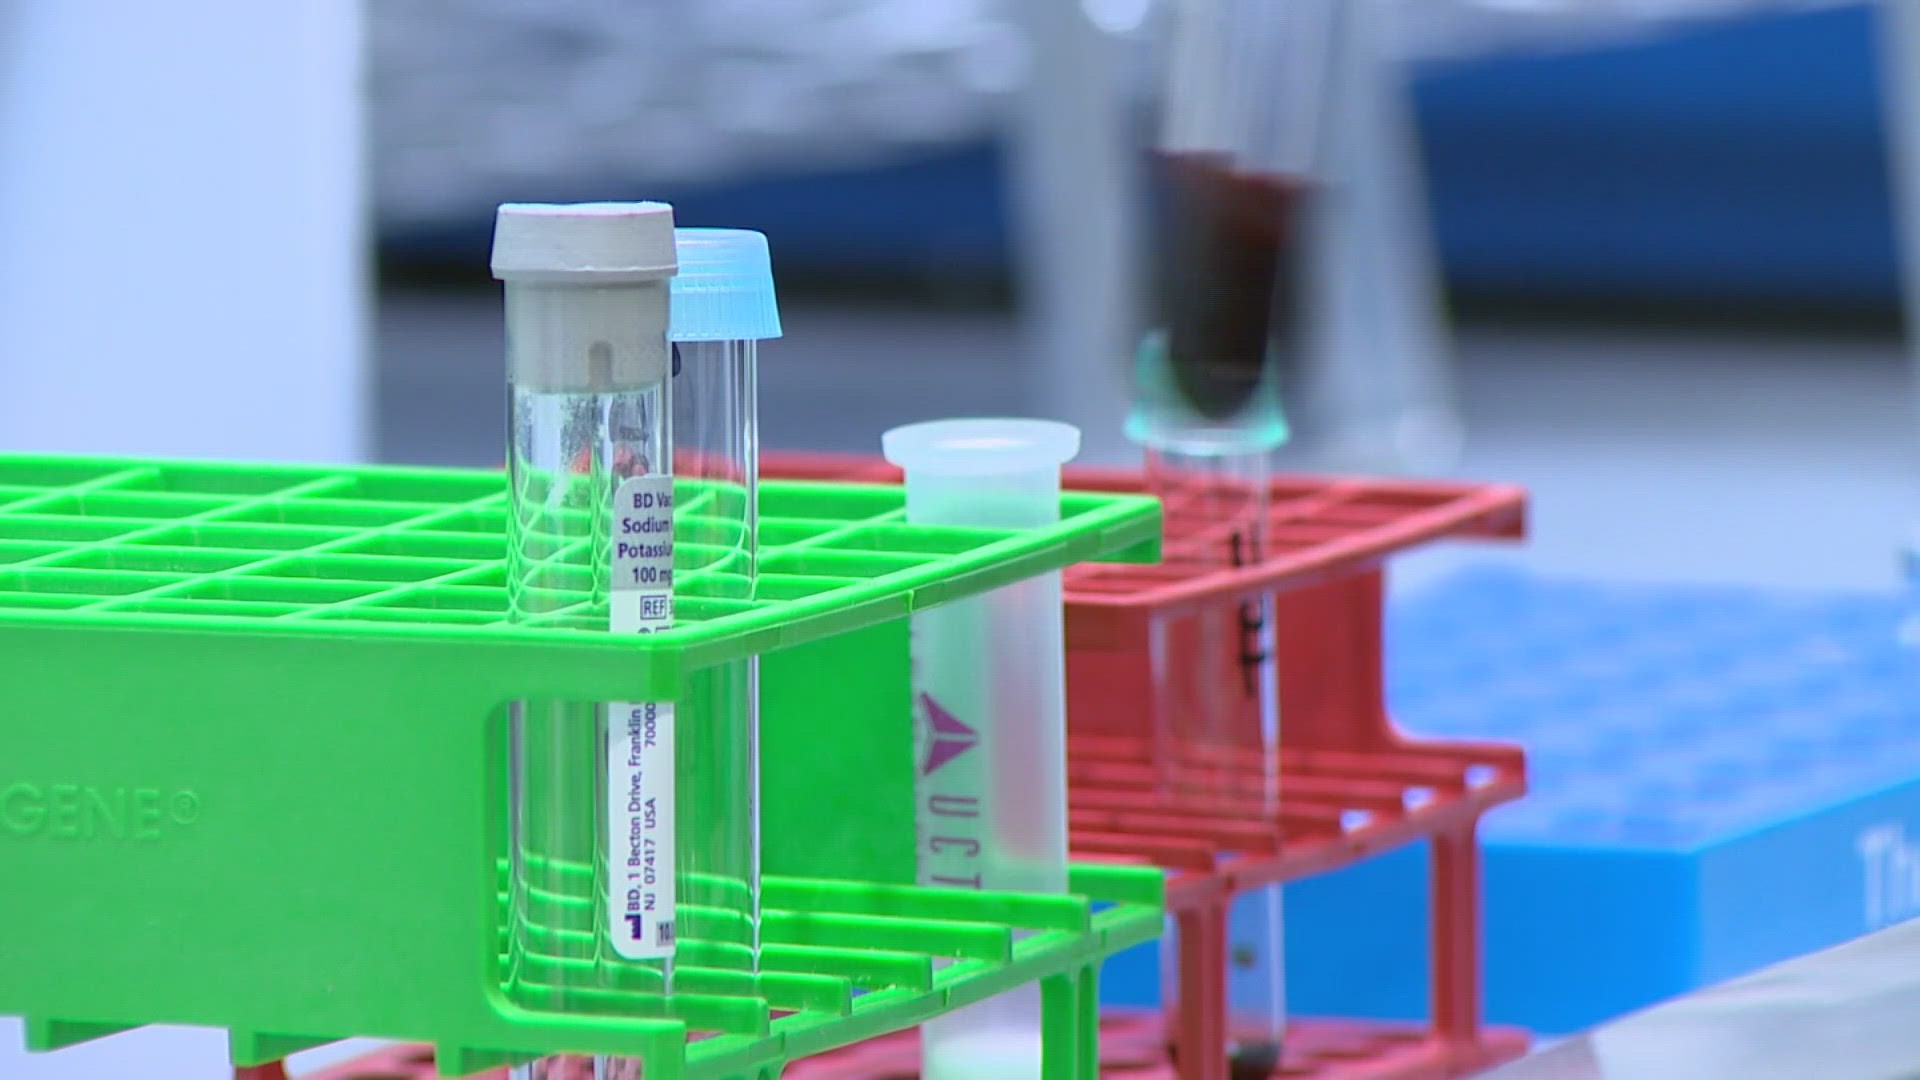 According to WSP, the turnaround time for toxicology results used to be 60–90 days, and they say the new lab will help get results back in that time range.